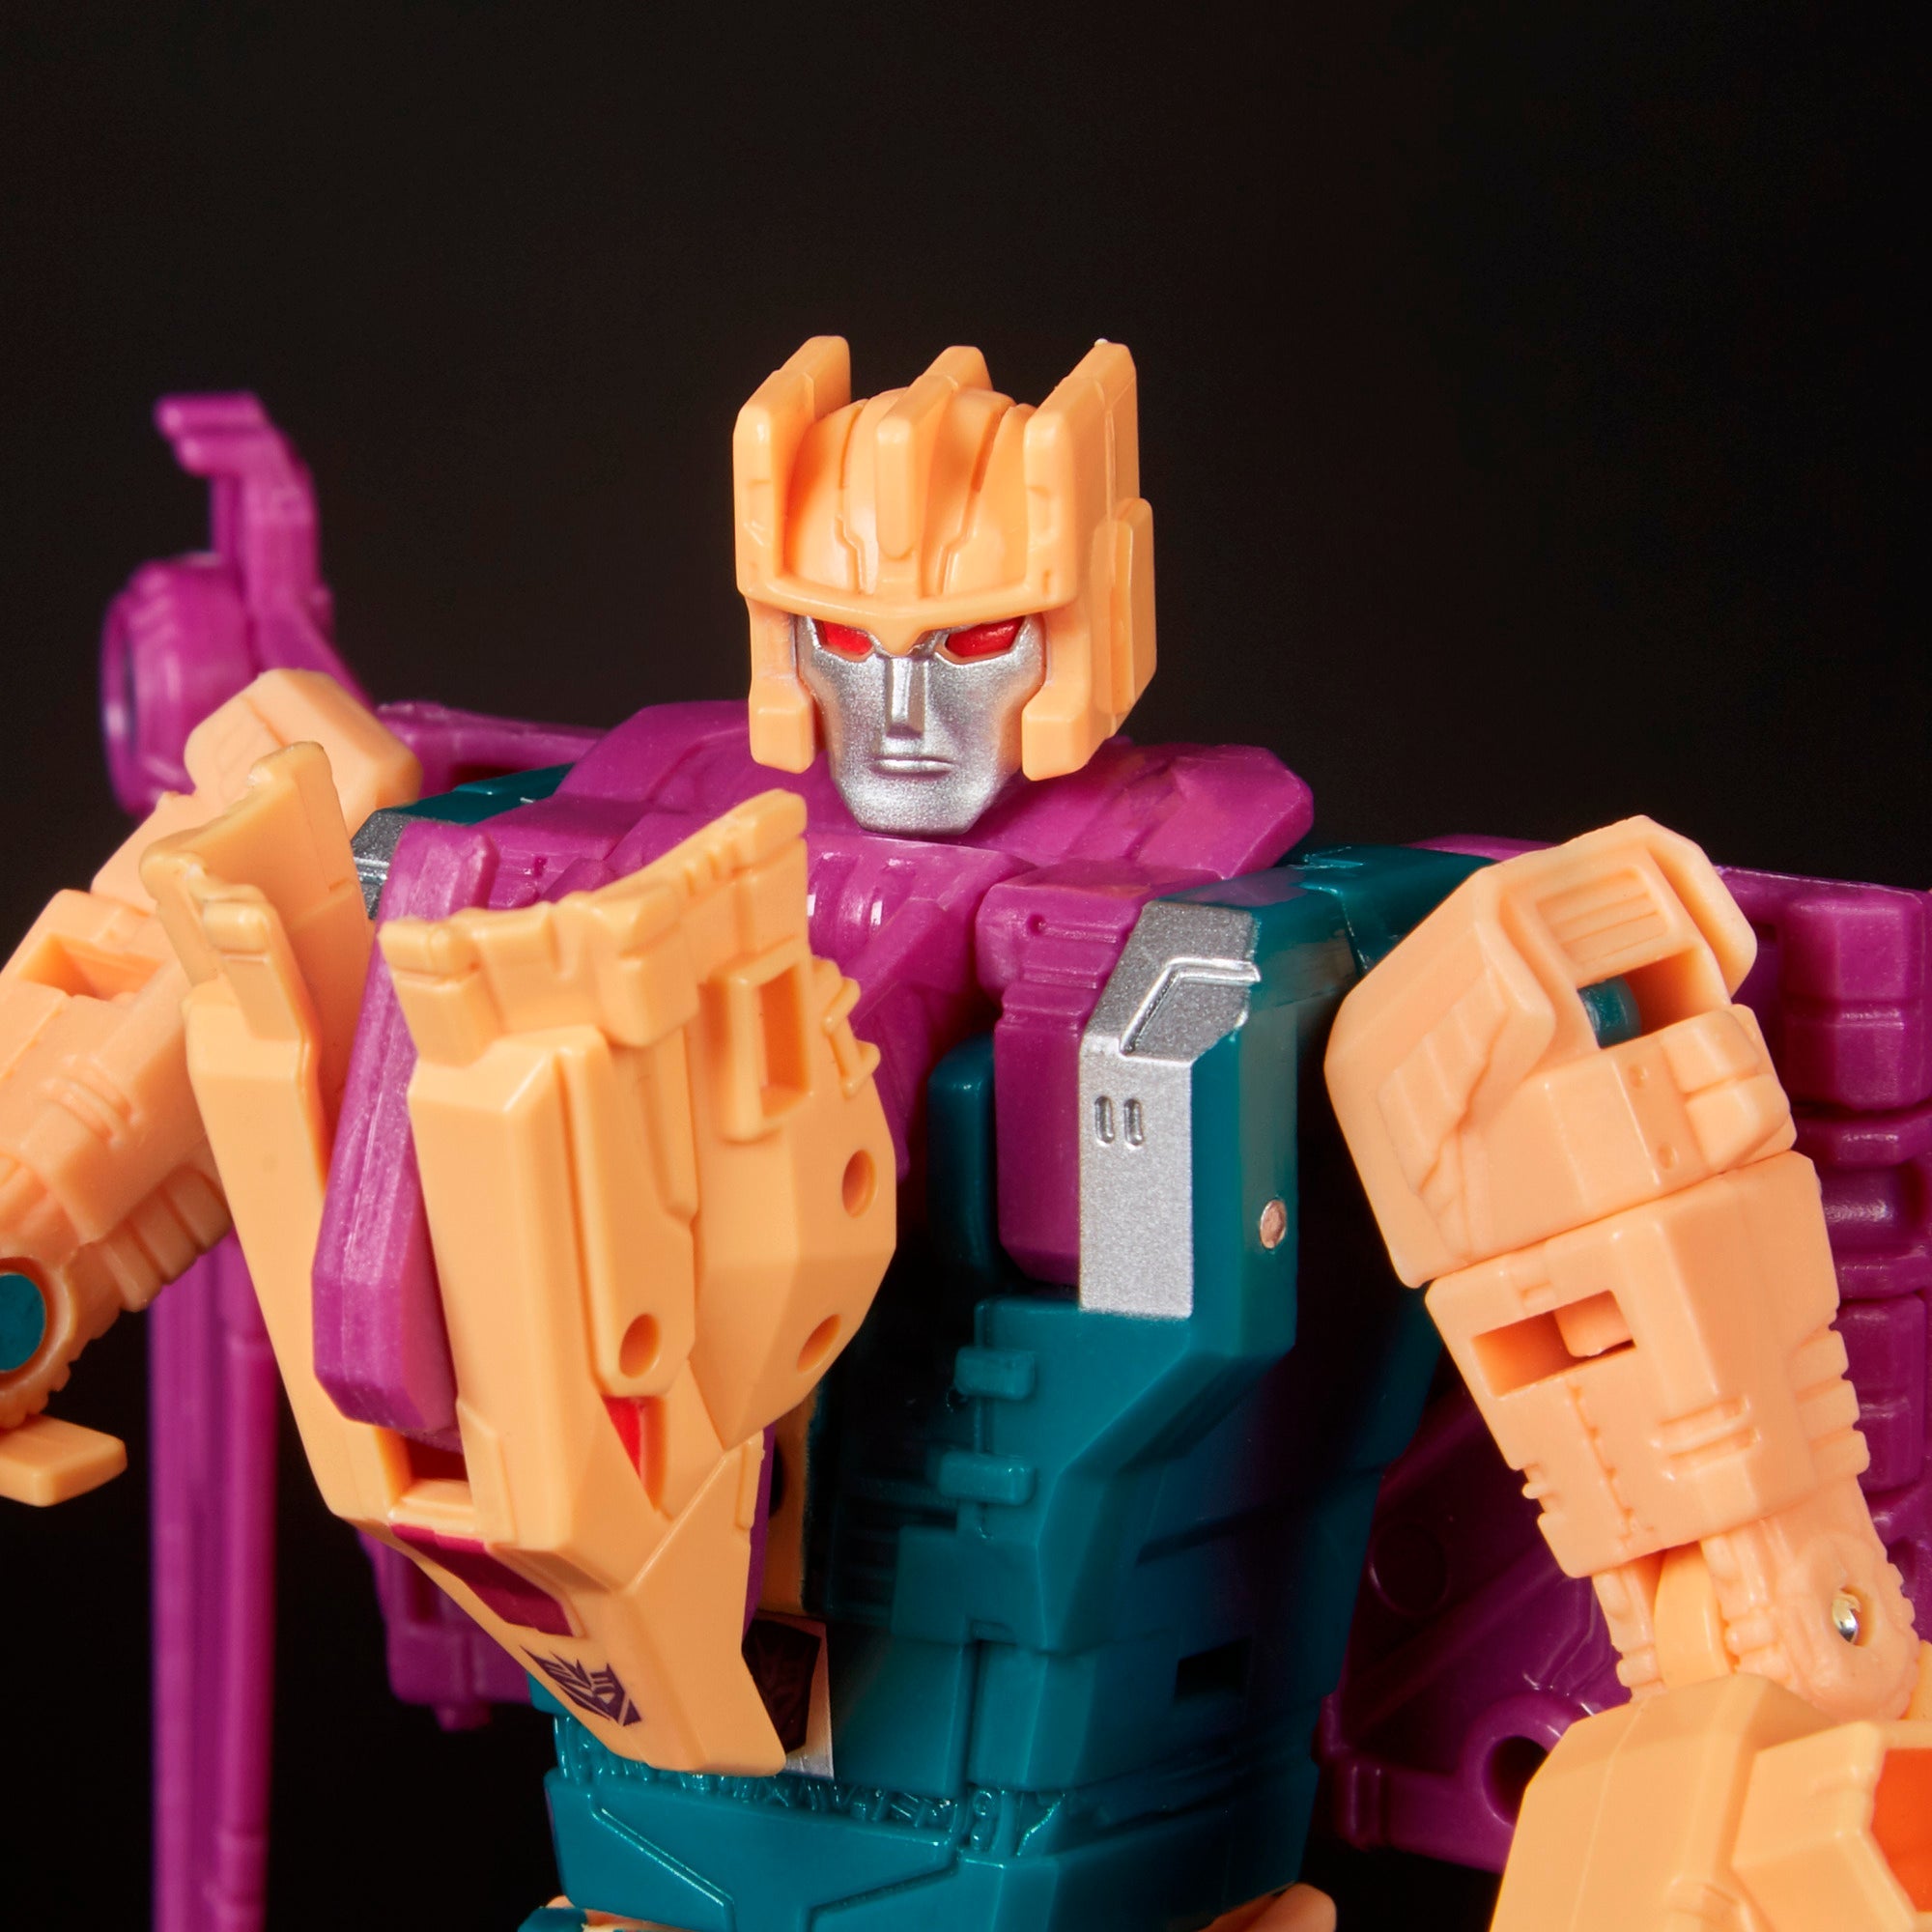 Transformers Generations Power of the Primes Deluxe Terrorcon Cutthroat Figure